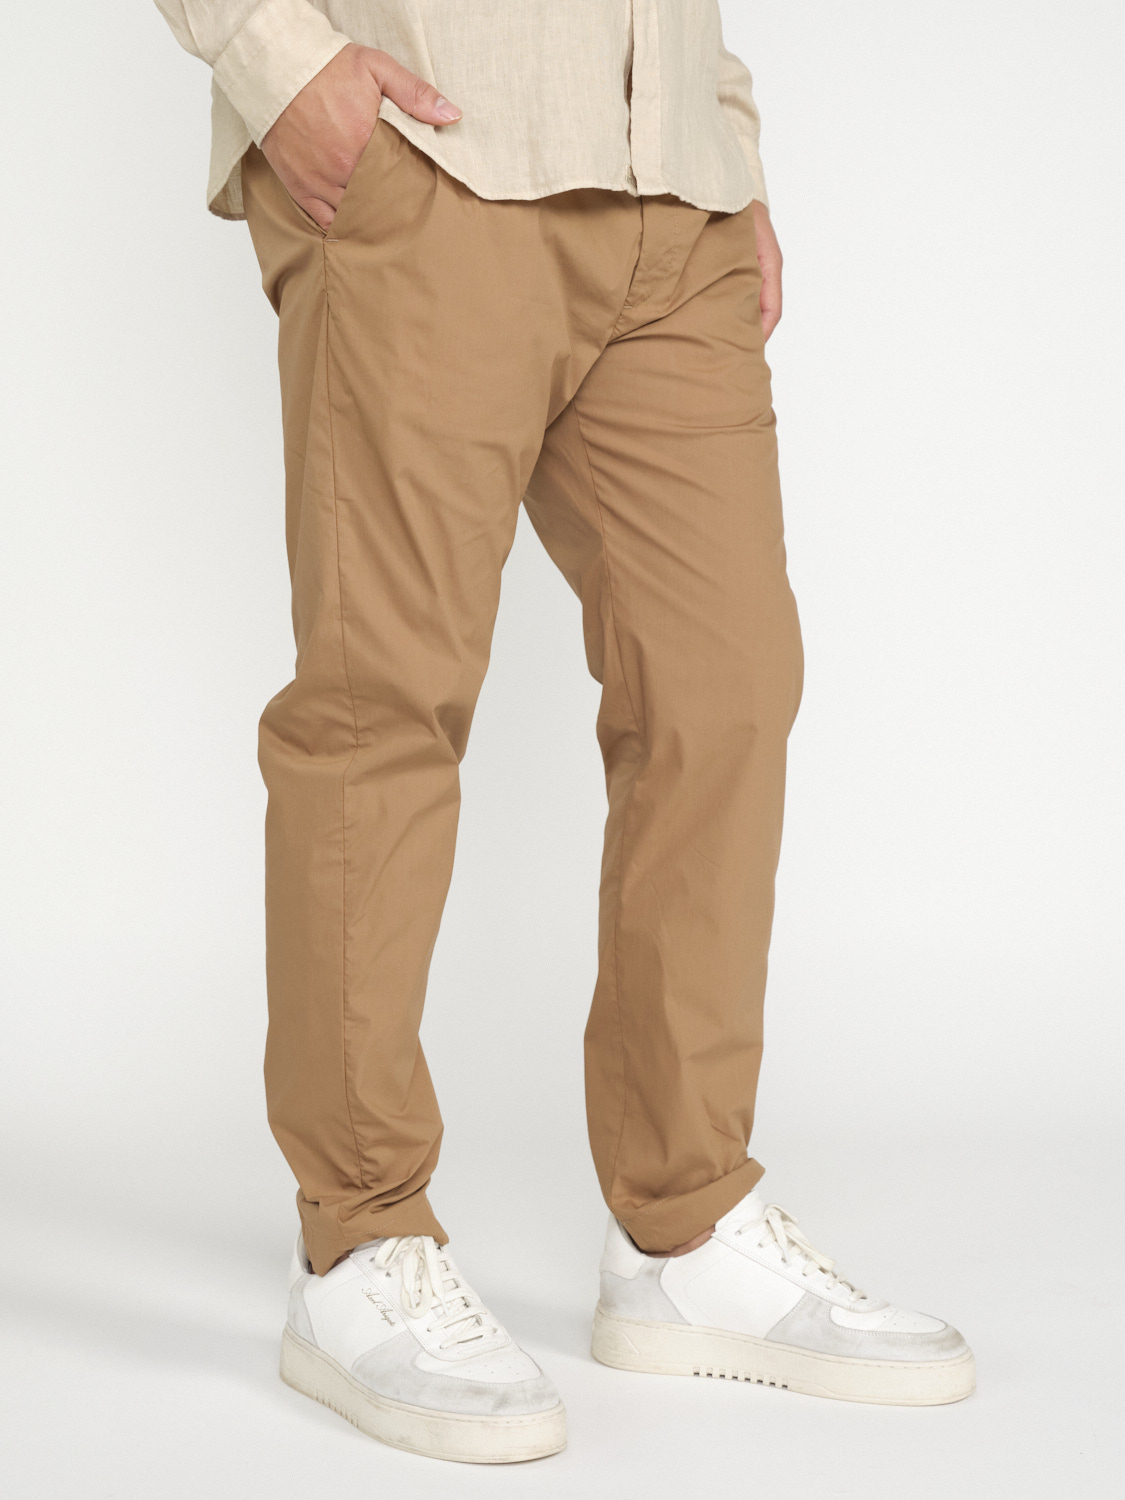 nine in the morning Yoga – cotton blend trousers in chino style  camel 46